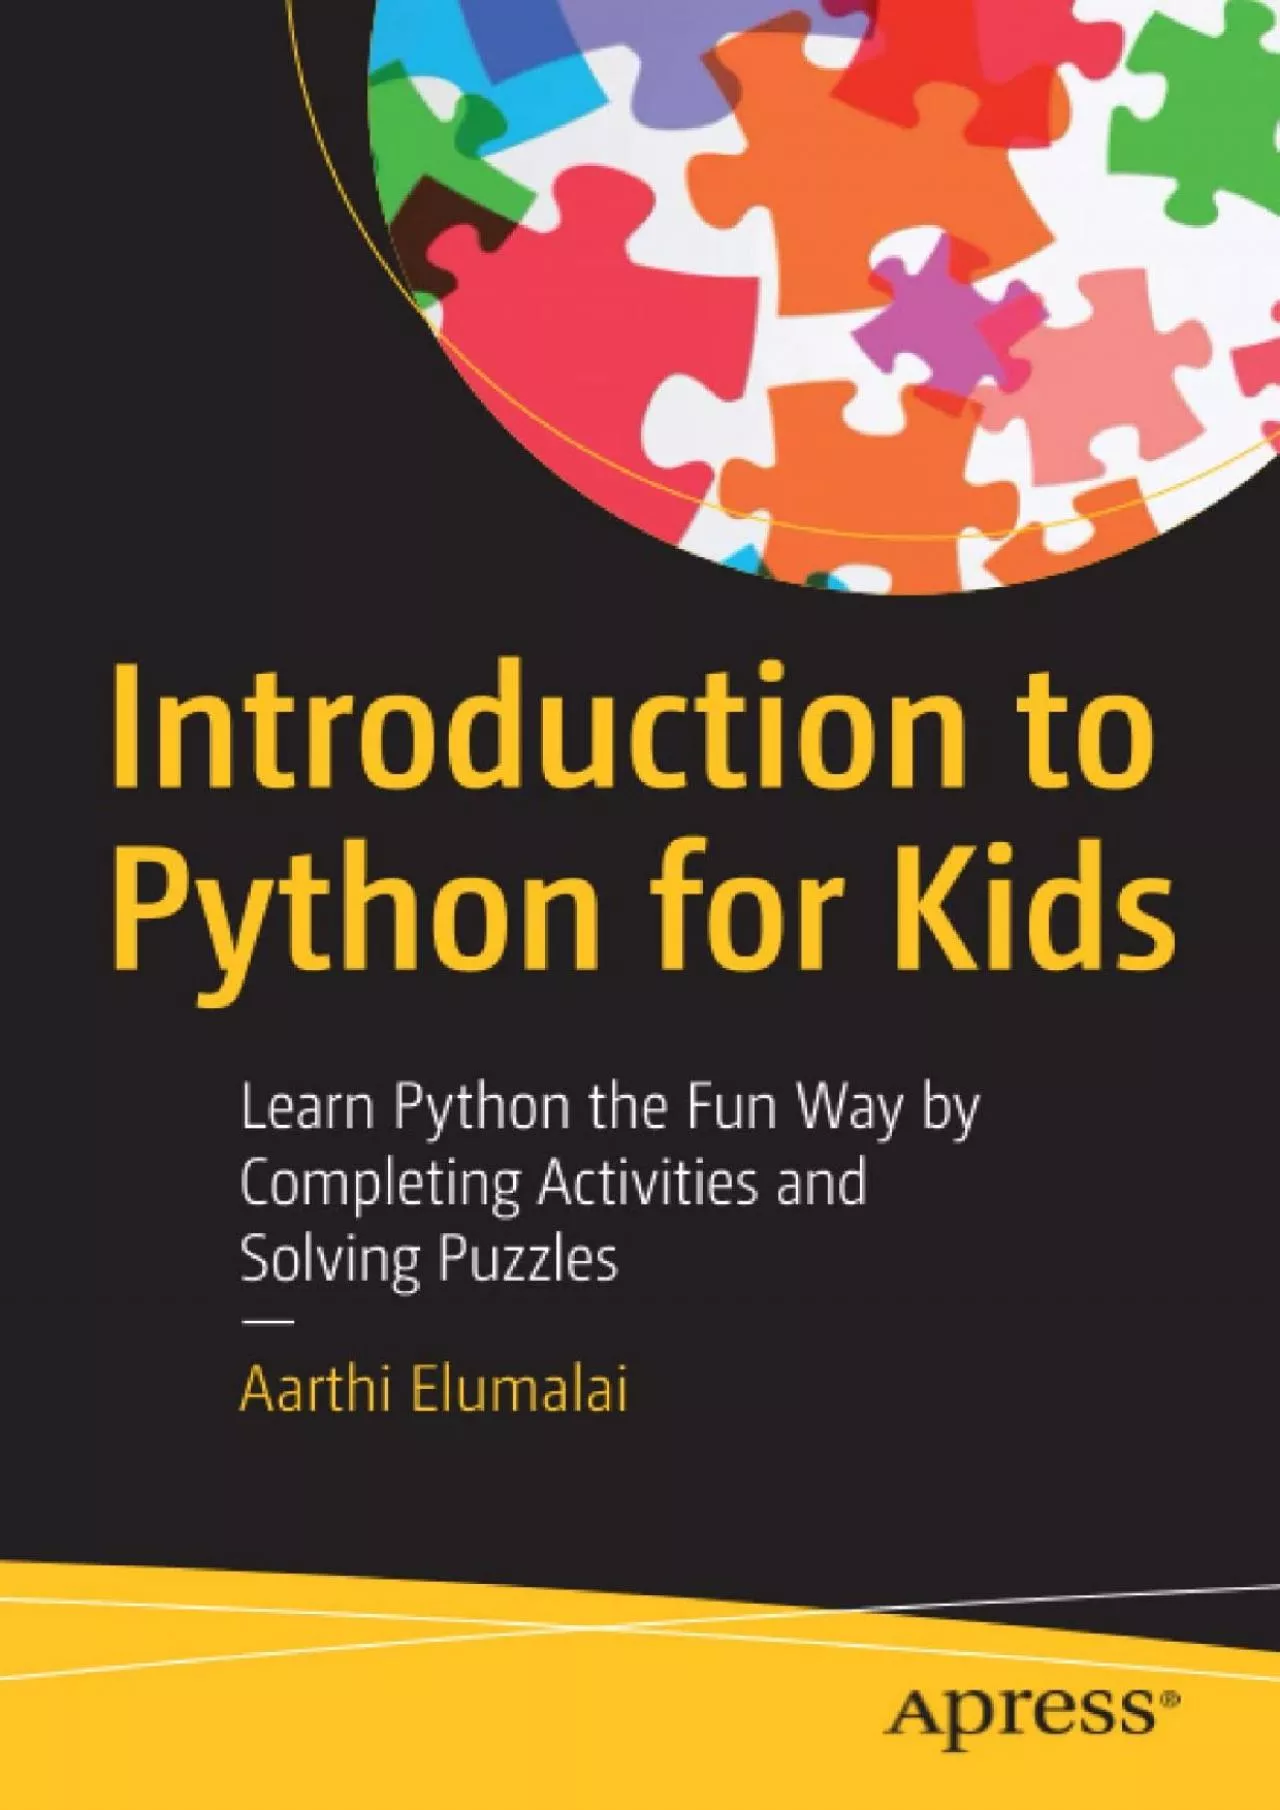 [FREE]-Introduction to Python for Kids Learn Python the Fun Way by Completing Activities